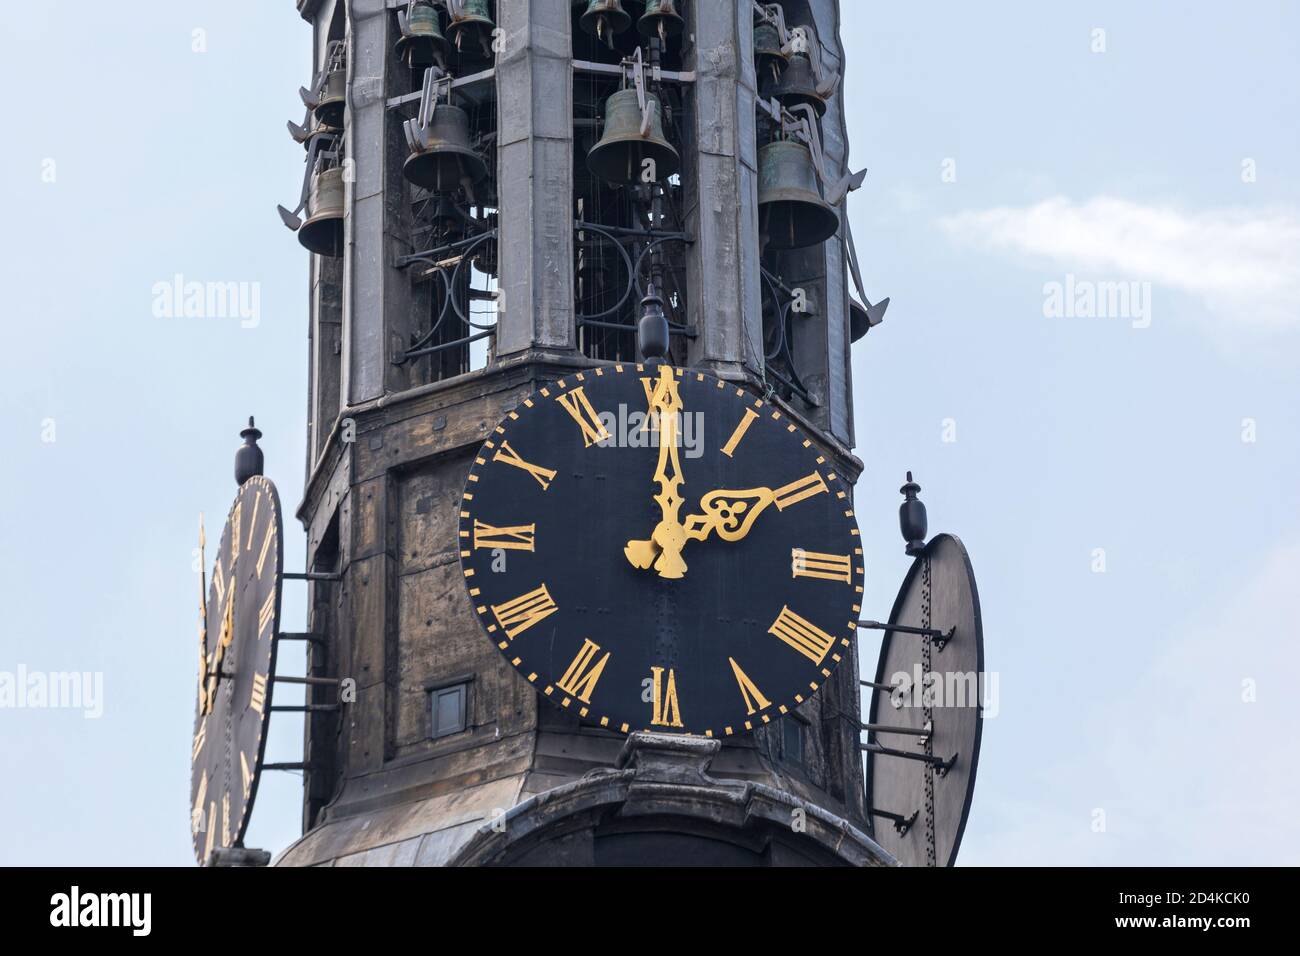 Black Dial Clock With Golden Needles at Church Spire in Amsterdam Stock Photo